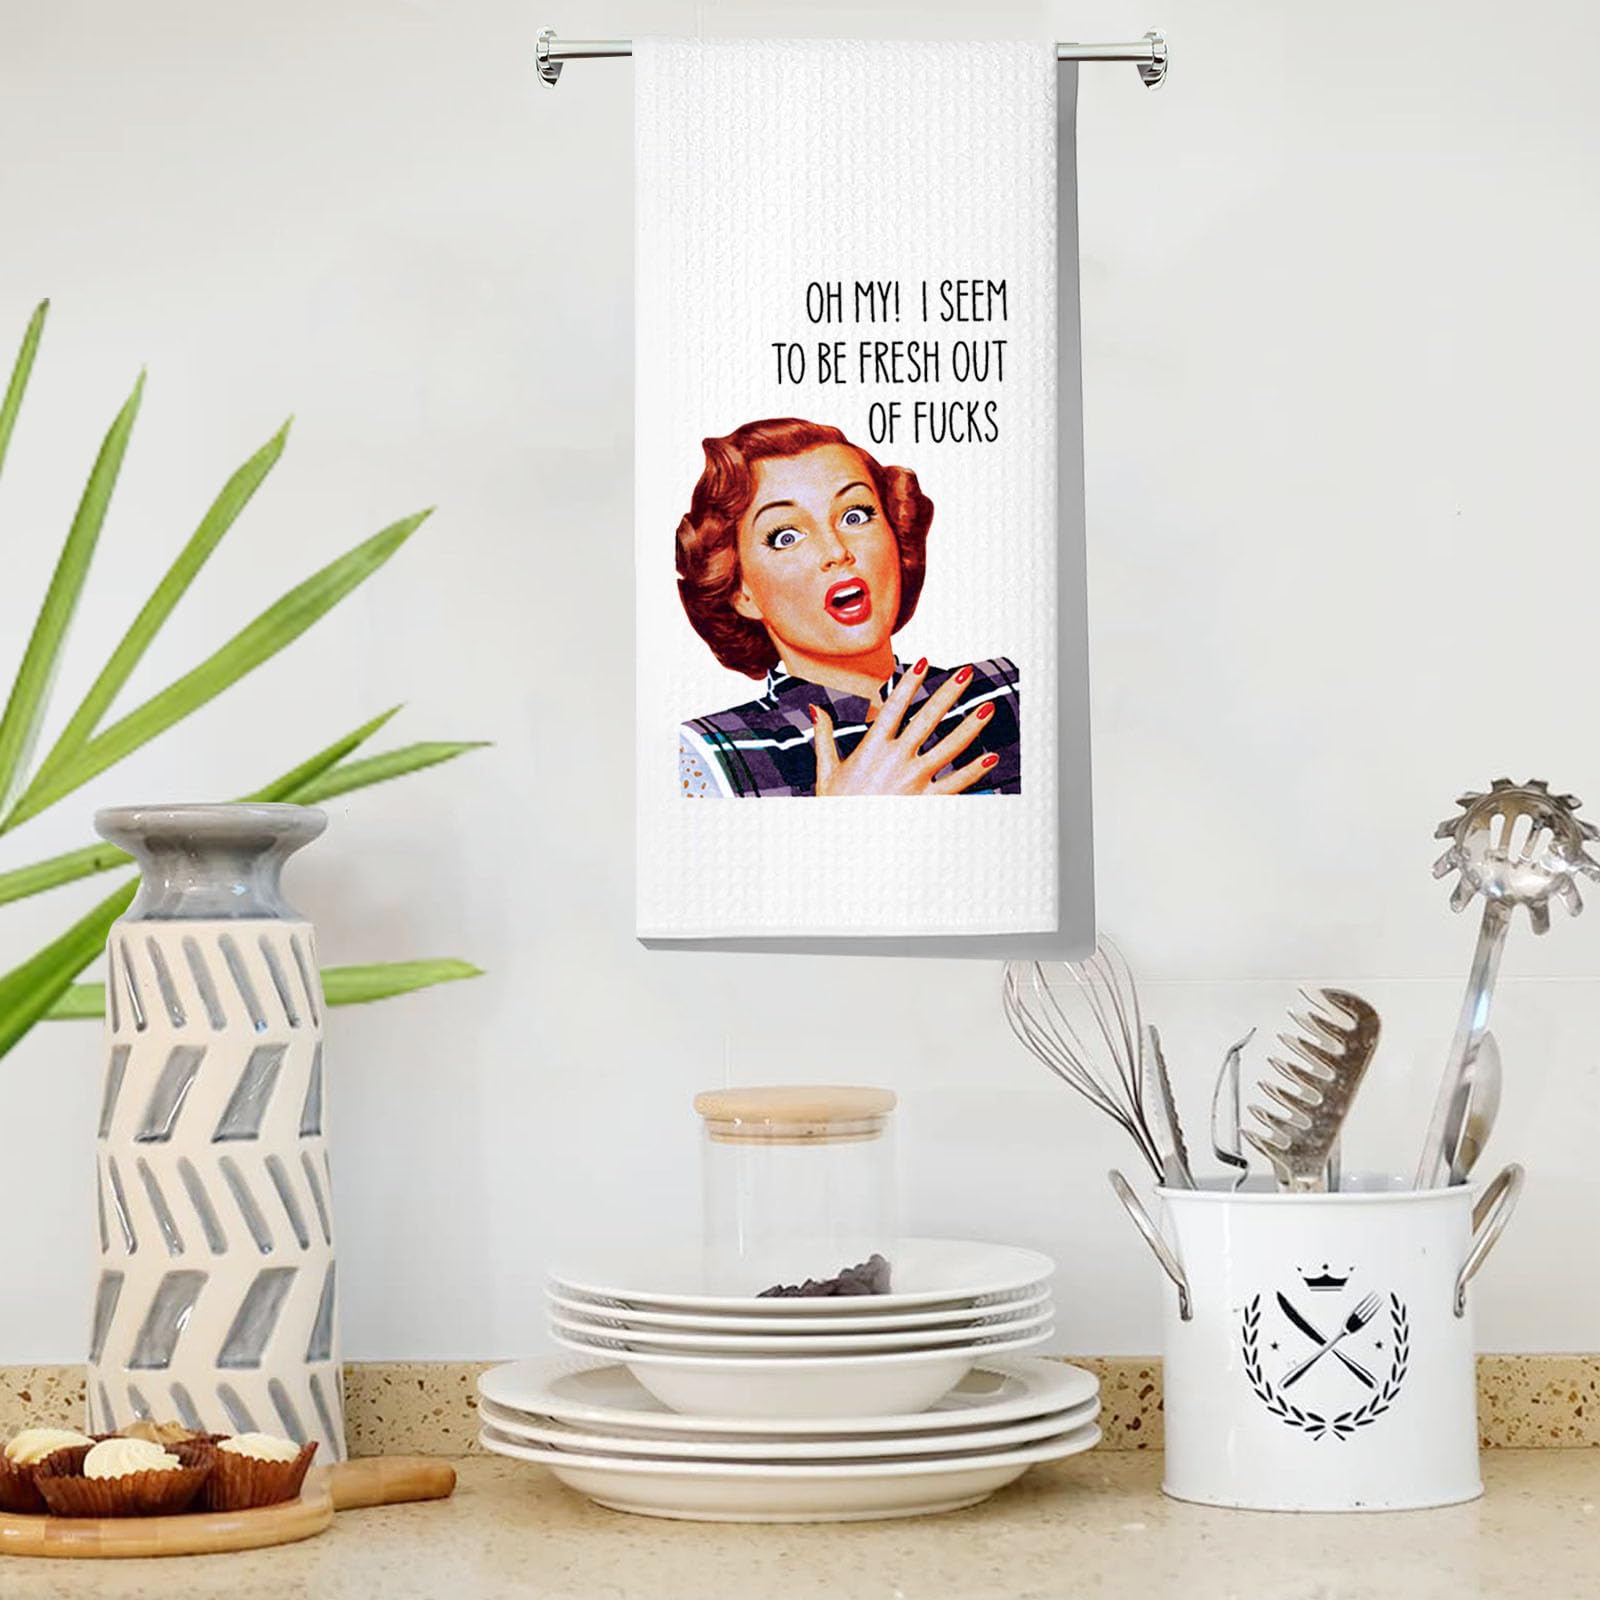 LEVLO Funny Retro Sassy Kitchen Towel Retro Housewife Gift Oh My I Seem to Be Fresh Out of Fucks Tea Towels Waffle Weave Kitchen Decor Dish Towels (Oh My I Seem)